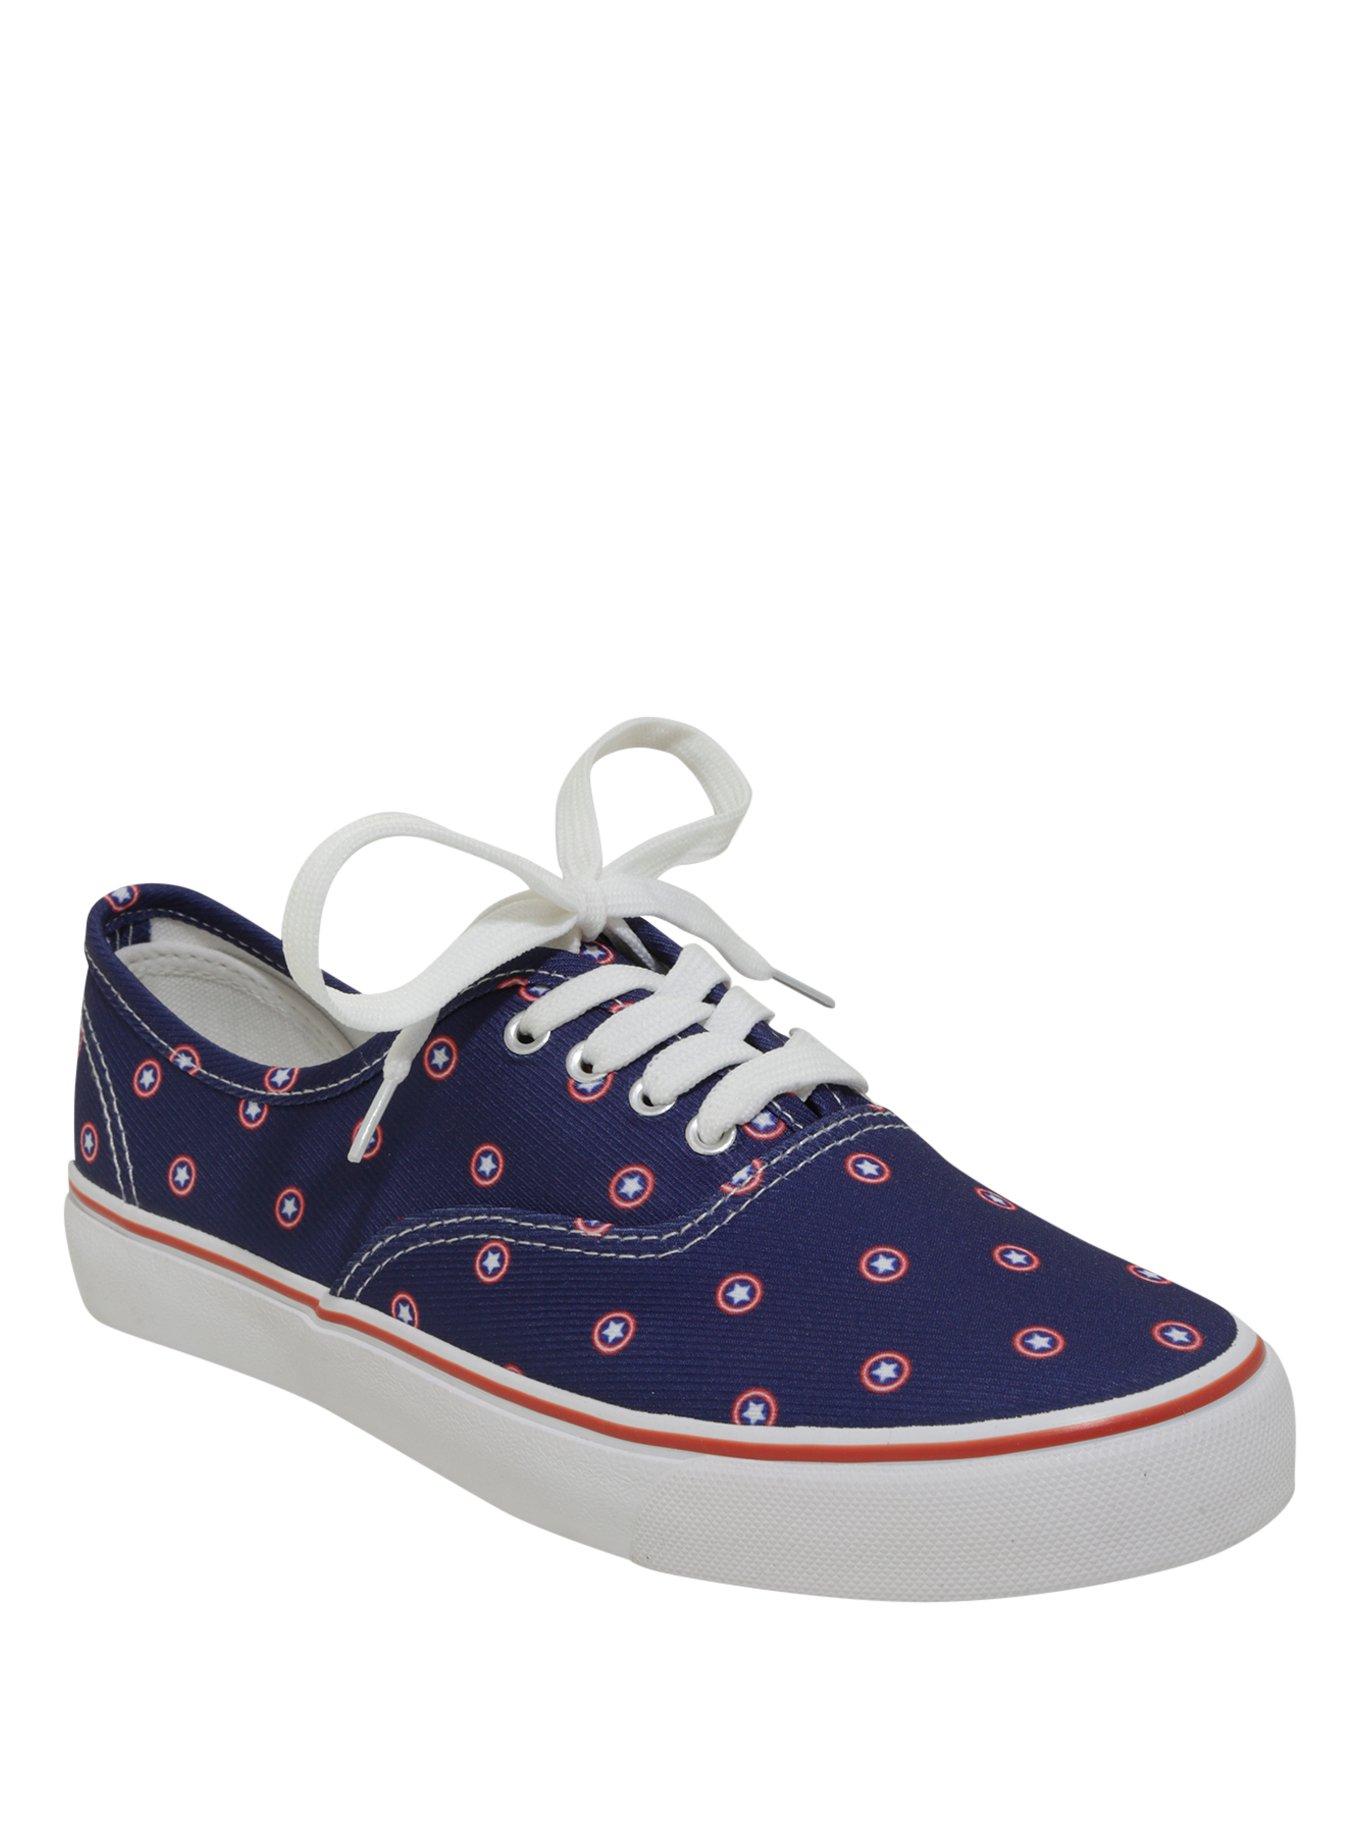 Marvel Captain America Shield Print Lace-Up Canvas Sneakers, MULTI, hi-res